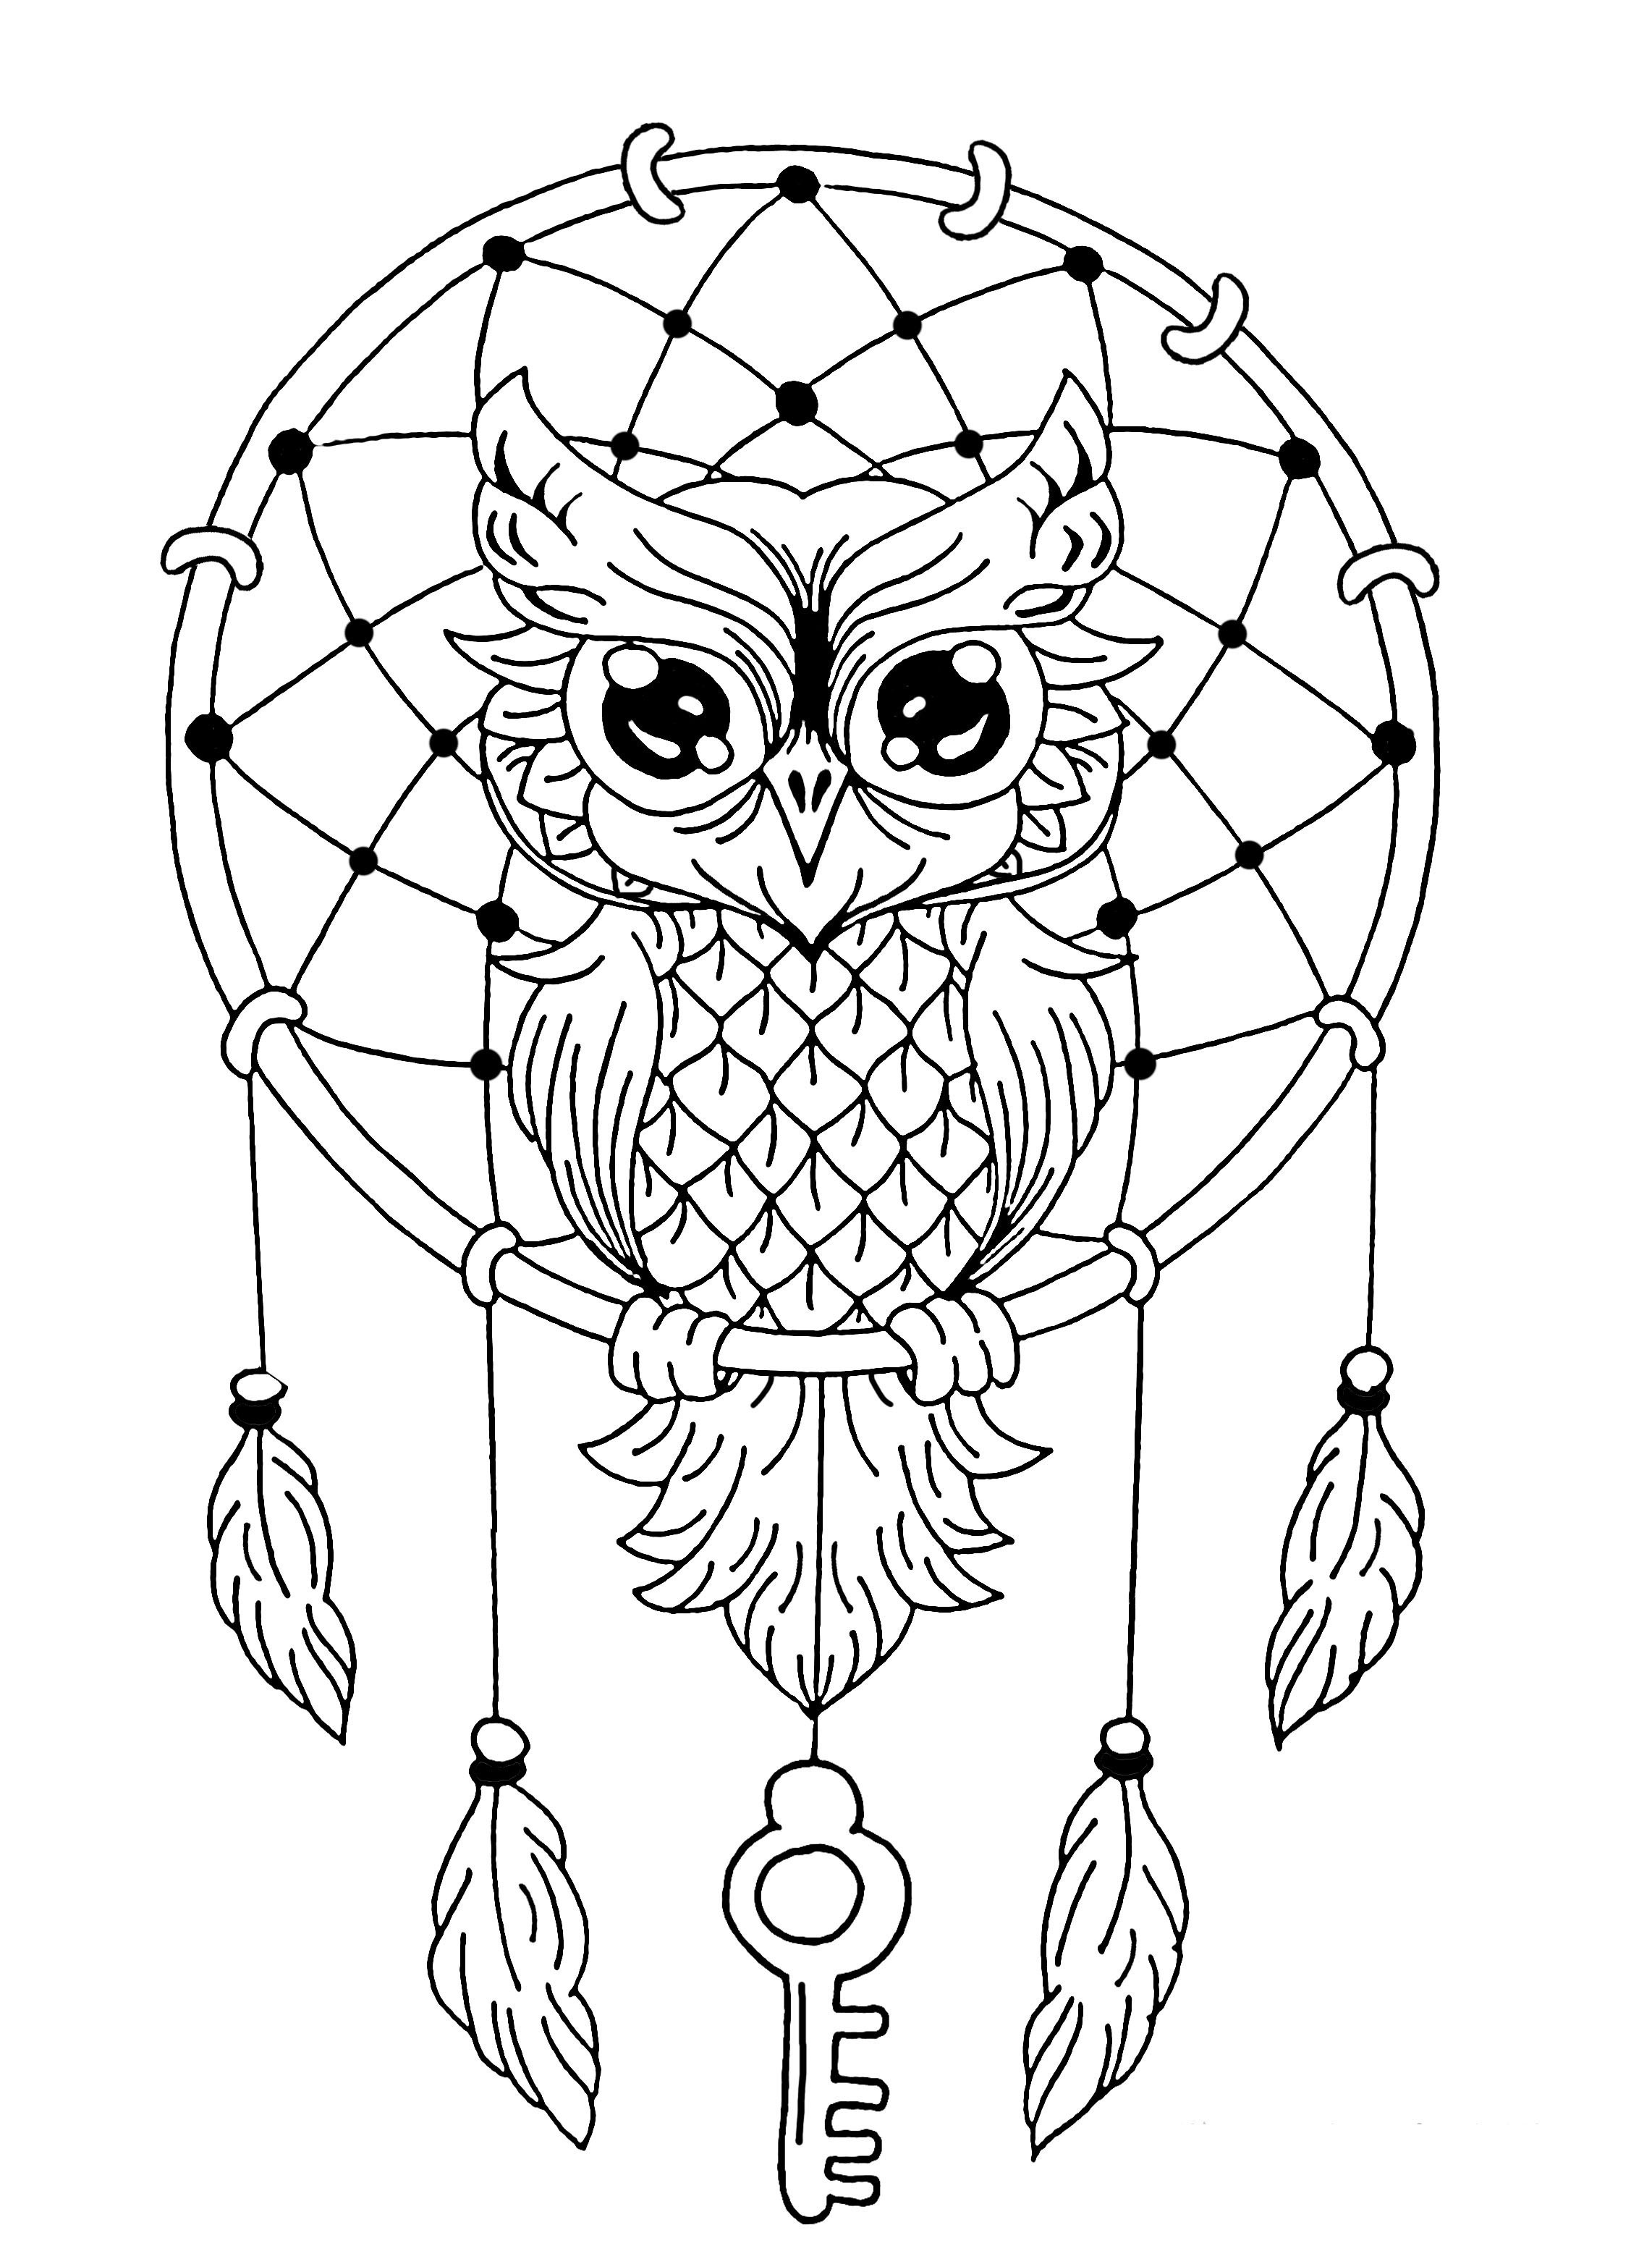 Hipster Girl Coloring Pages at GetDrawings | Free download